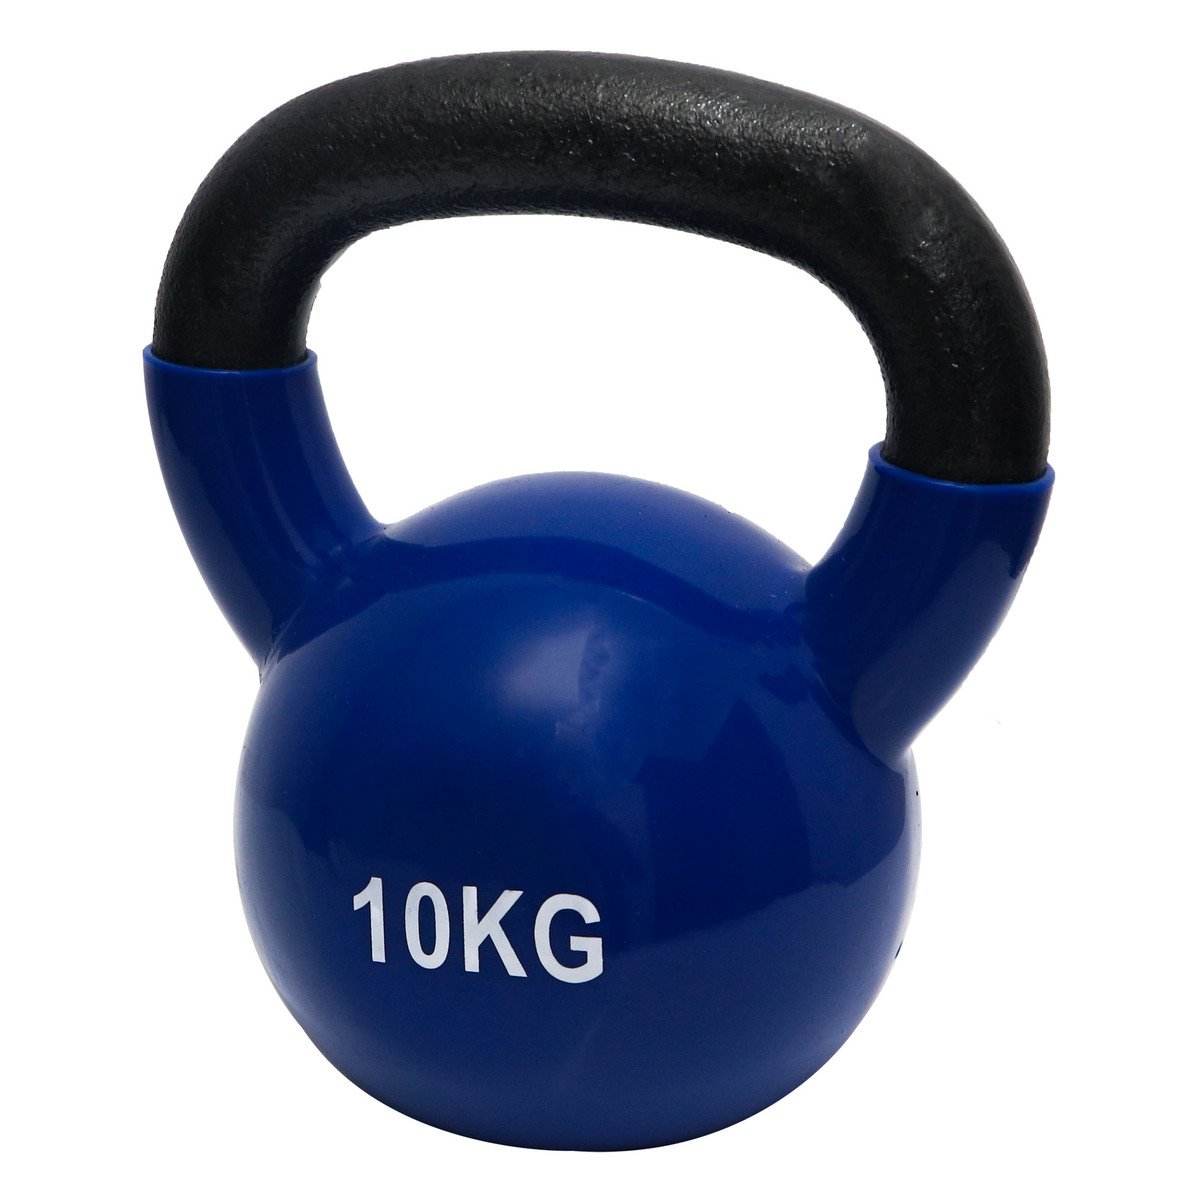 Sports Champion Kettlebell HJ-A036 10Kg Assorted Color